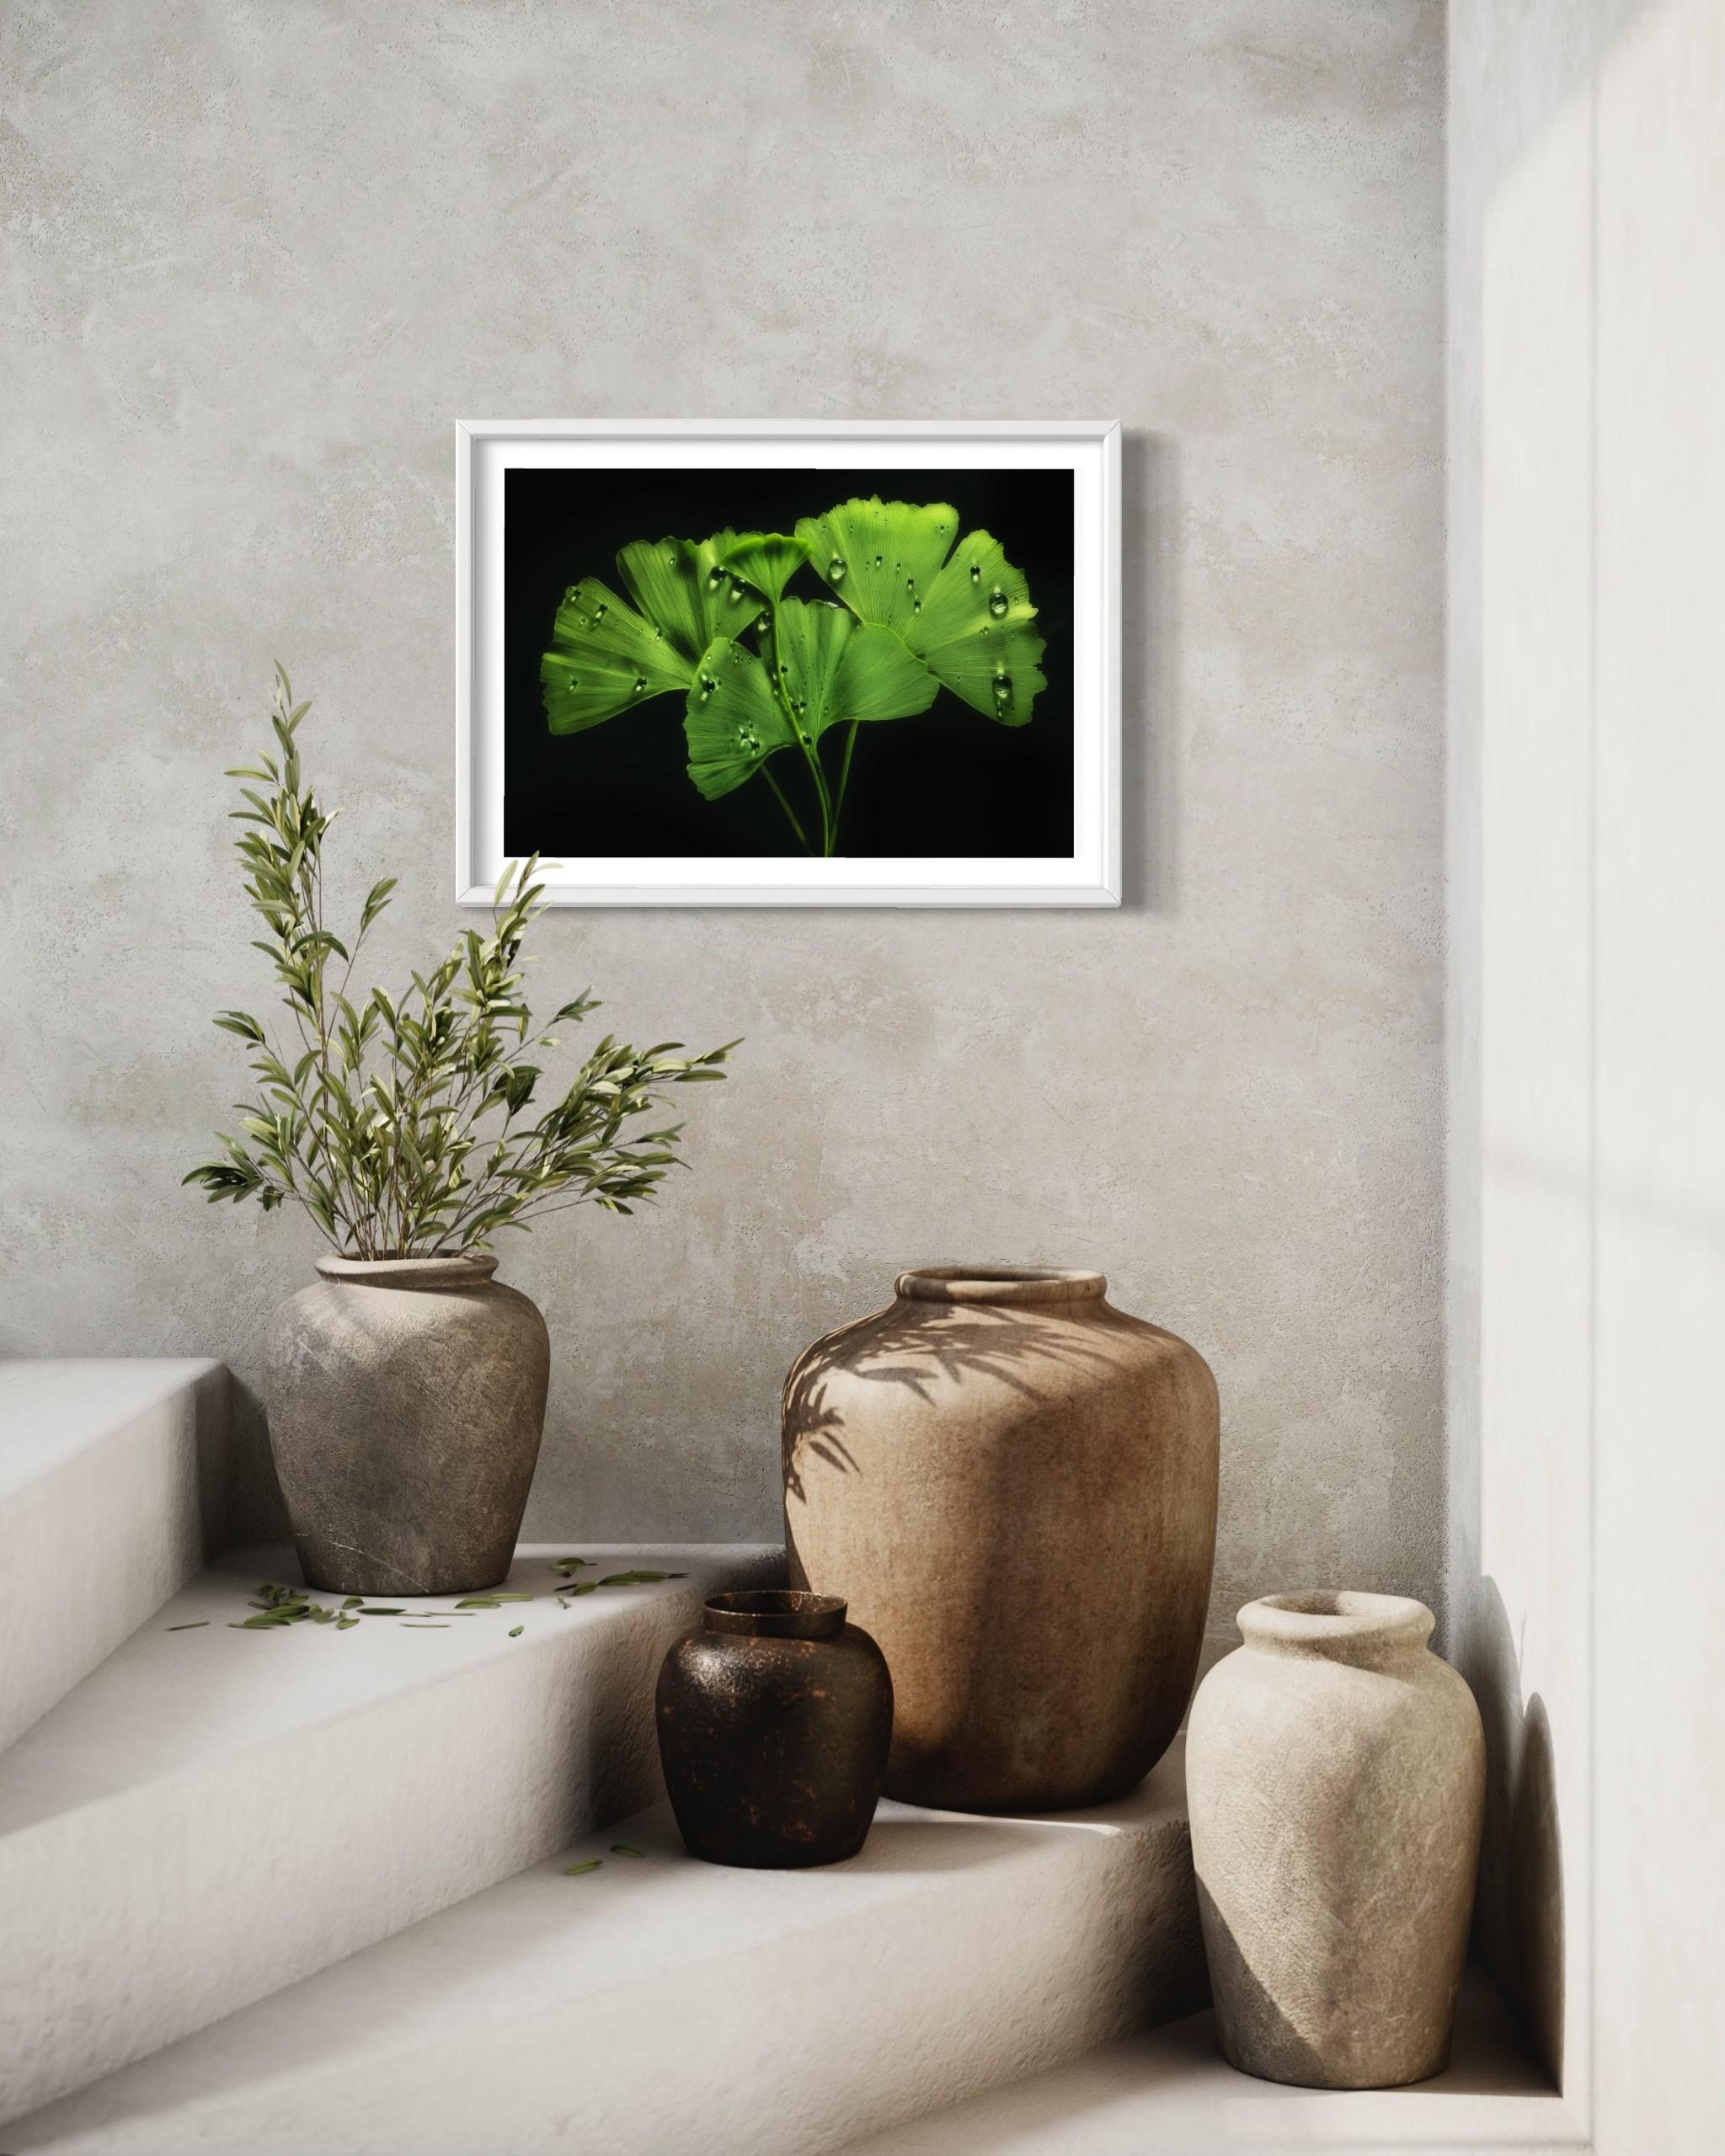 Ginko Biloba No. 1, floral photography, limited edition print, green art For Sale 4